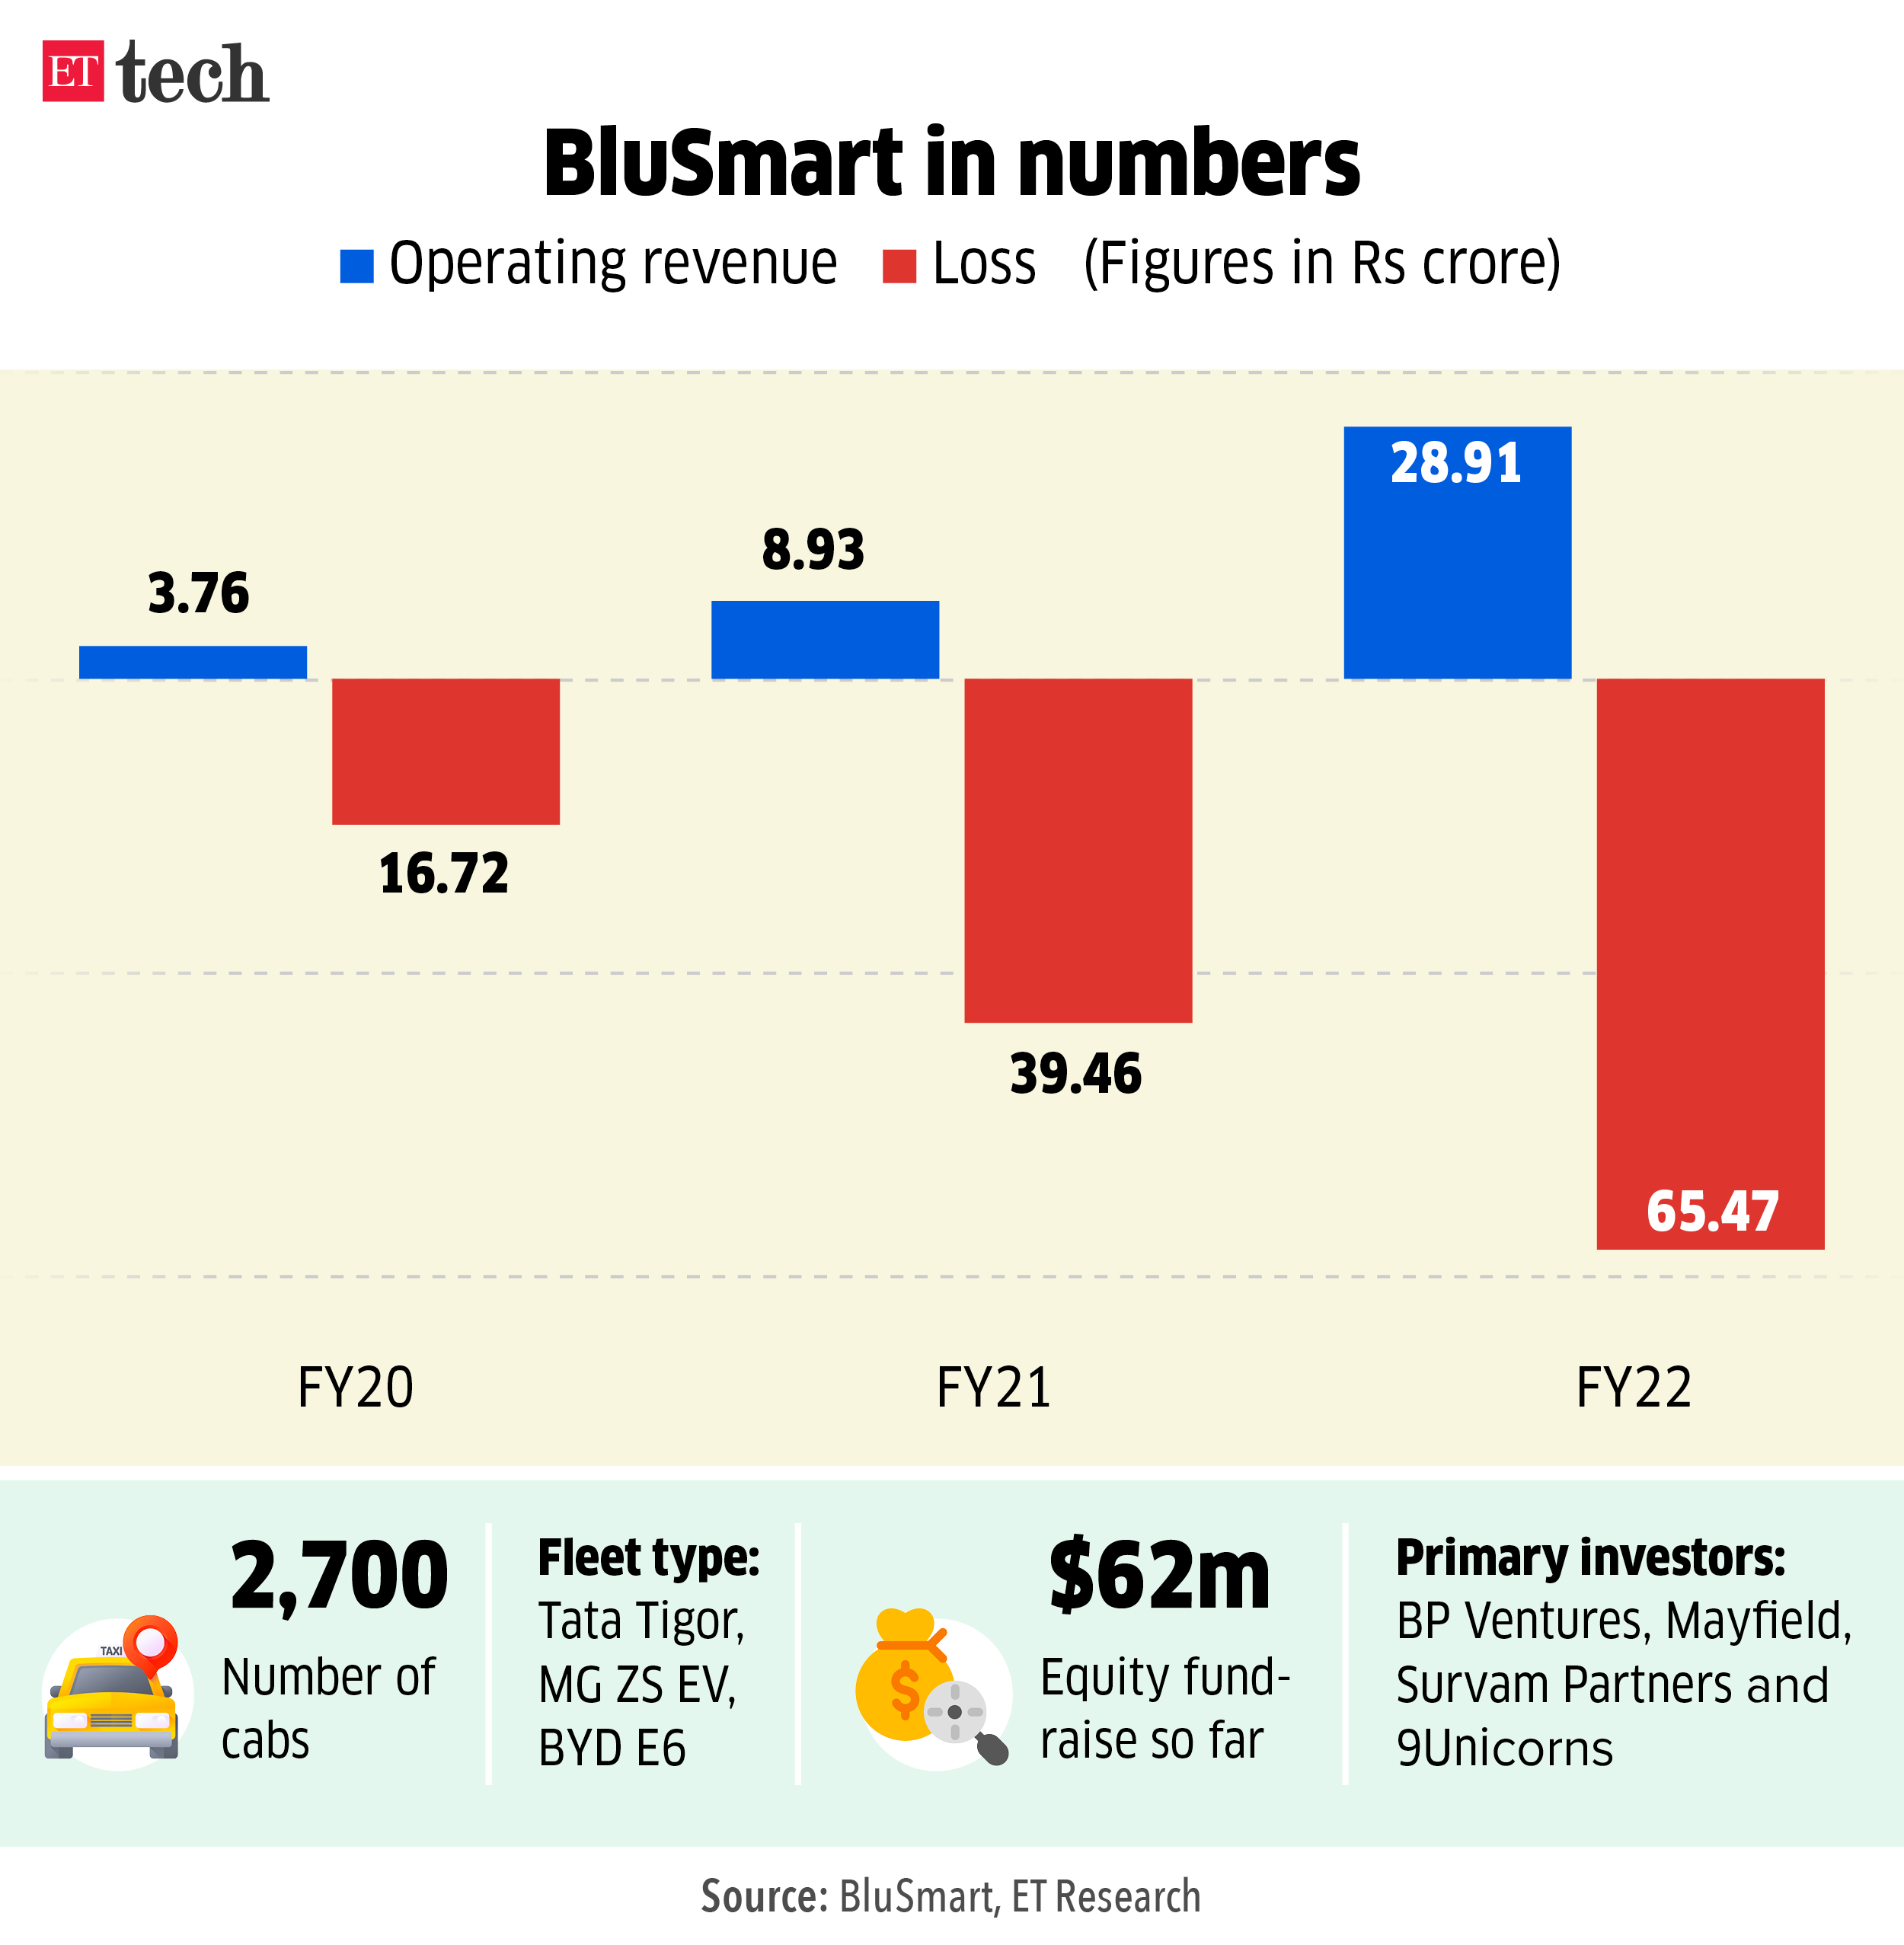 BluSmart in numbers_Graphic_ETTECH